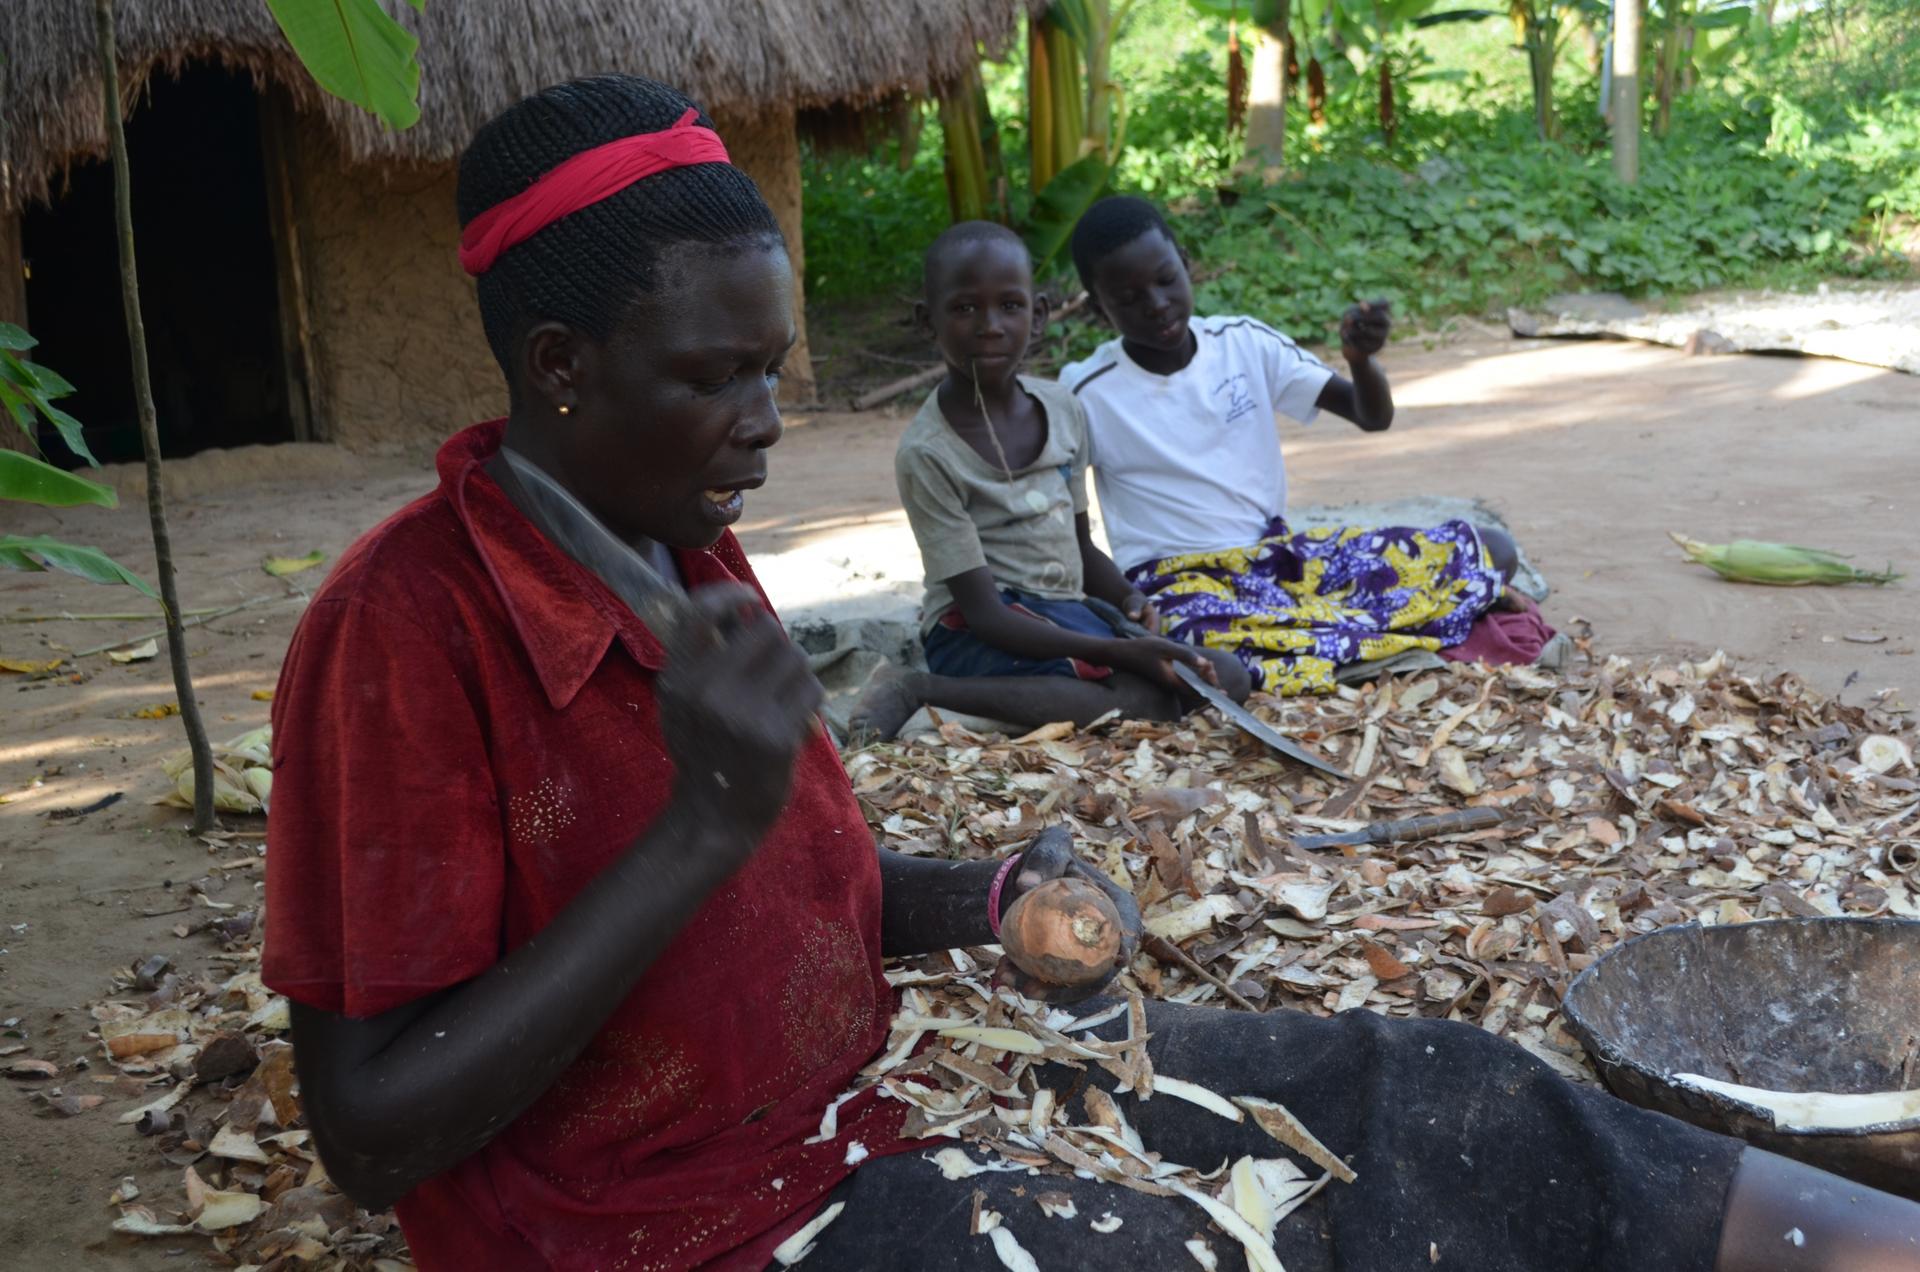 A woman wears a red head band and slices cassava root while sitting on the ground with two children nearby. 